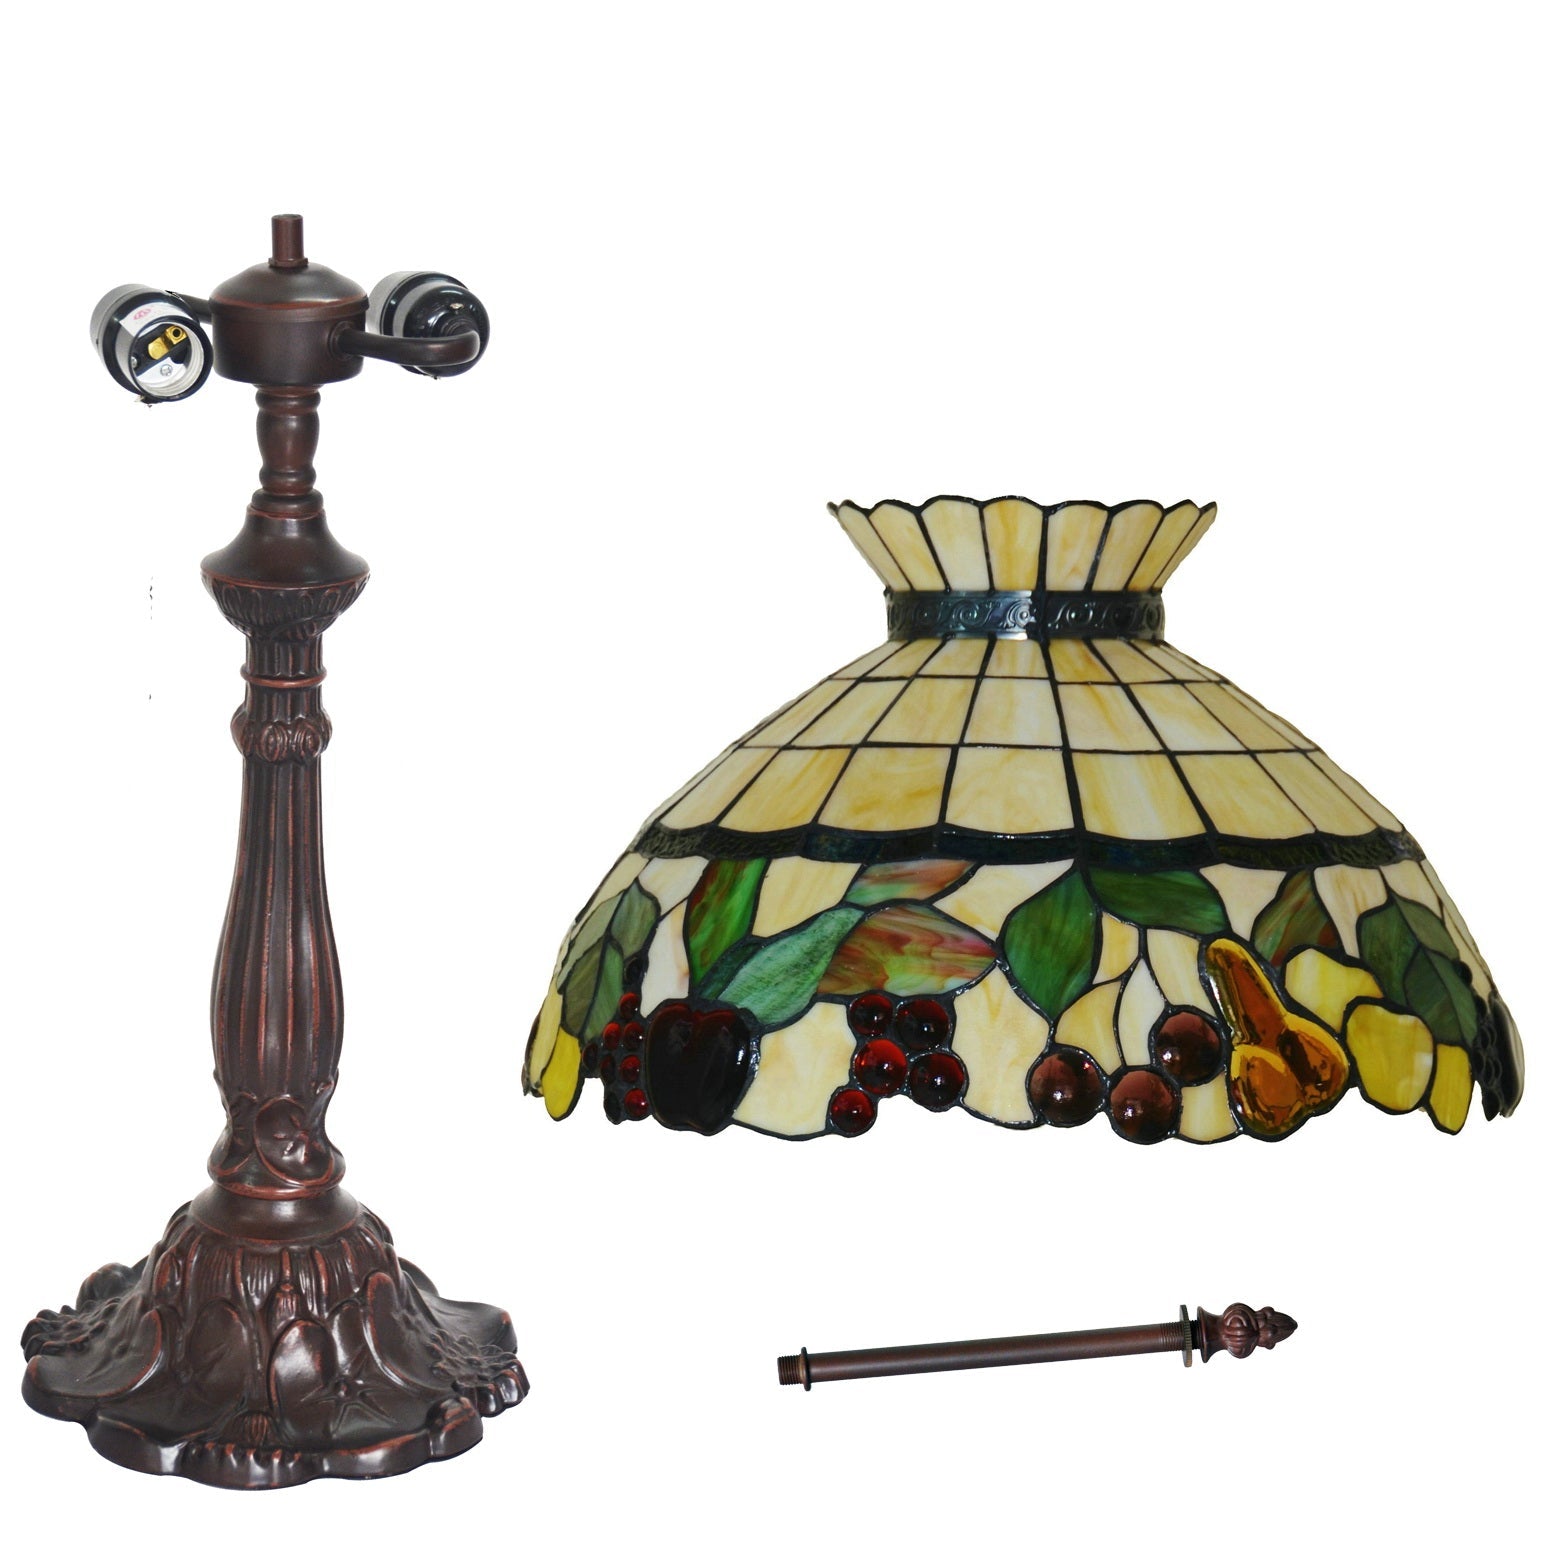 Huge 18" Vintage Fruit Crown Style Table Lamp Tiffany Stained Glass Table Lamps@ Limited Stock only